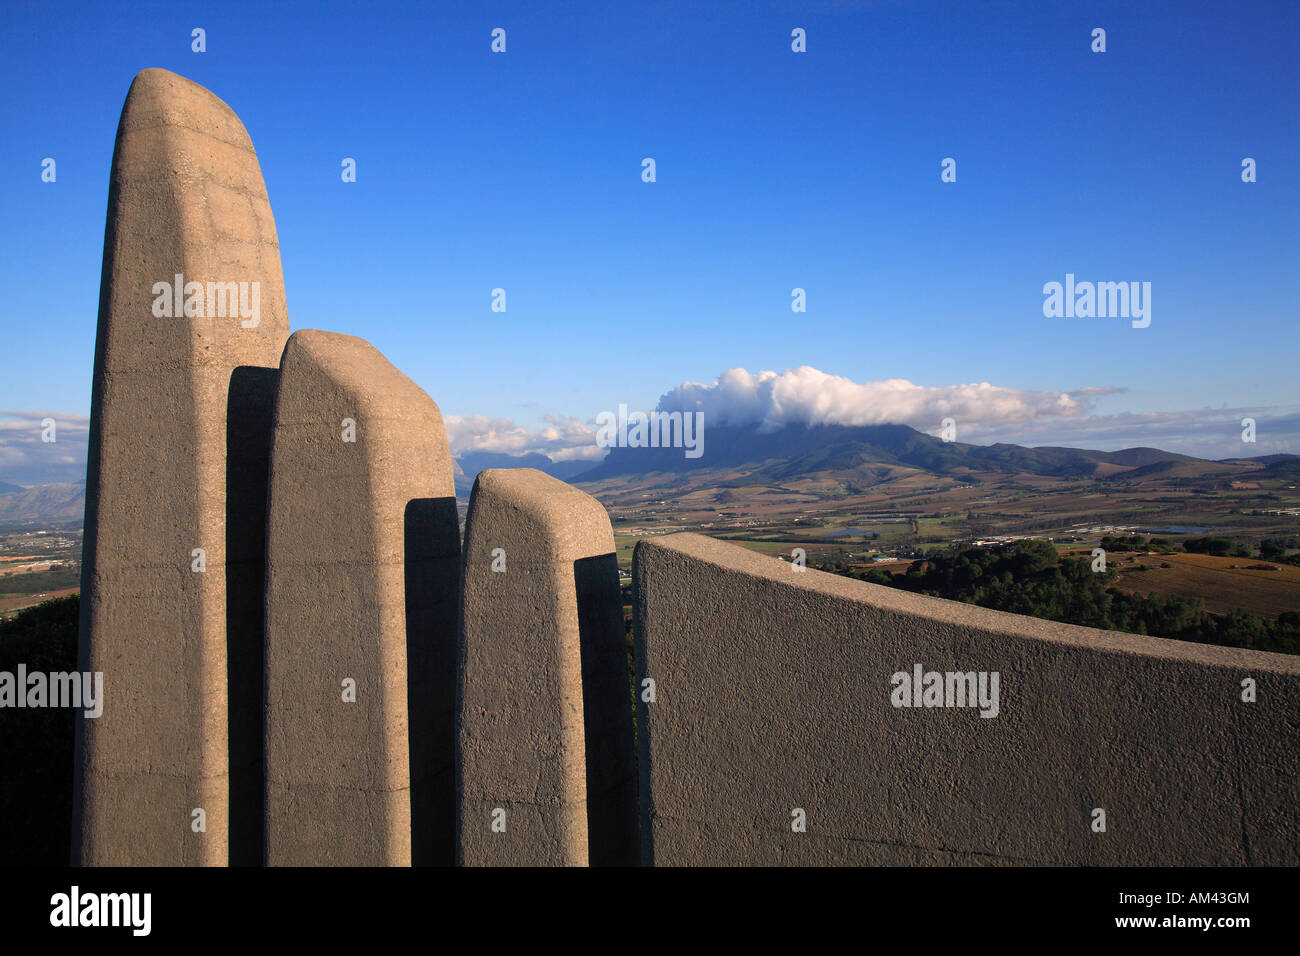 South Africa, Winelands, Paarl, Afrikaans Language Monument erected by architect Jan Van Wyk in 1975 Stock Photo